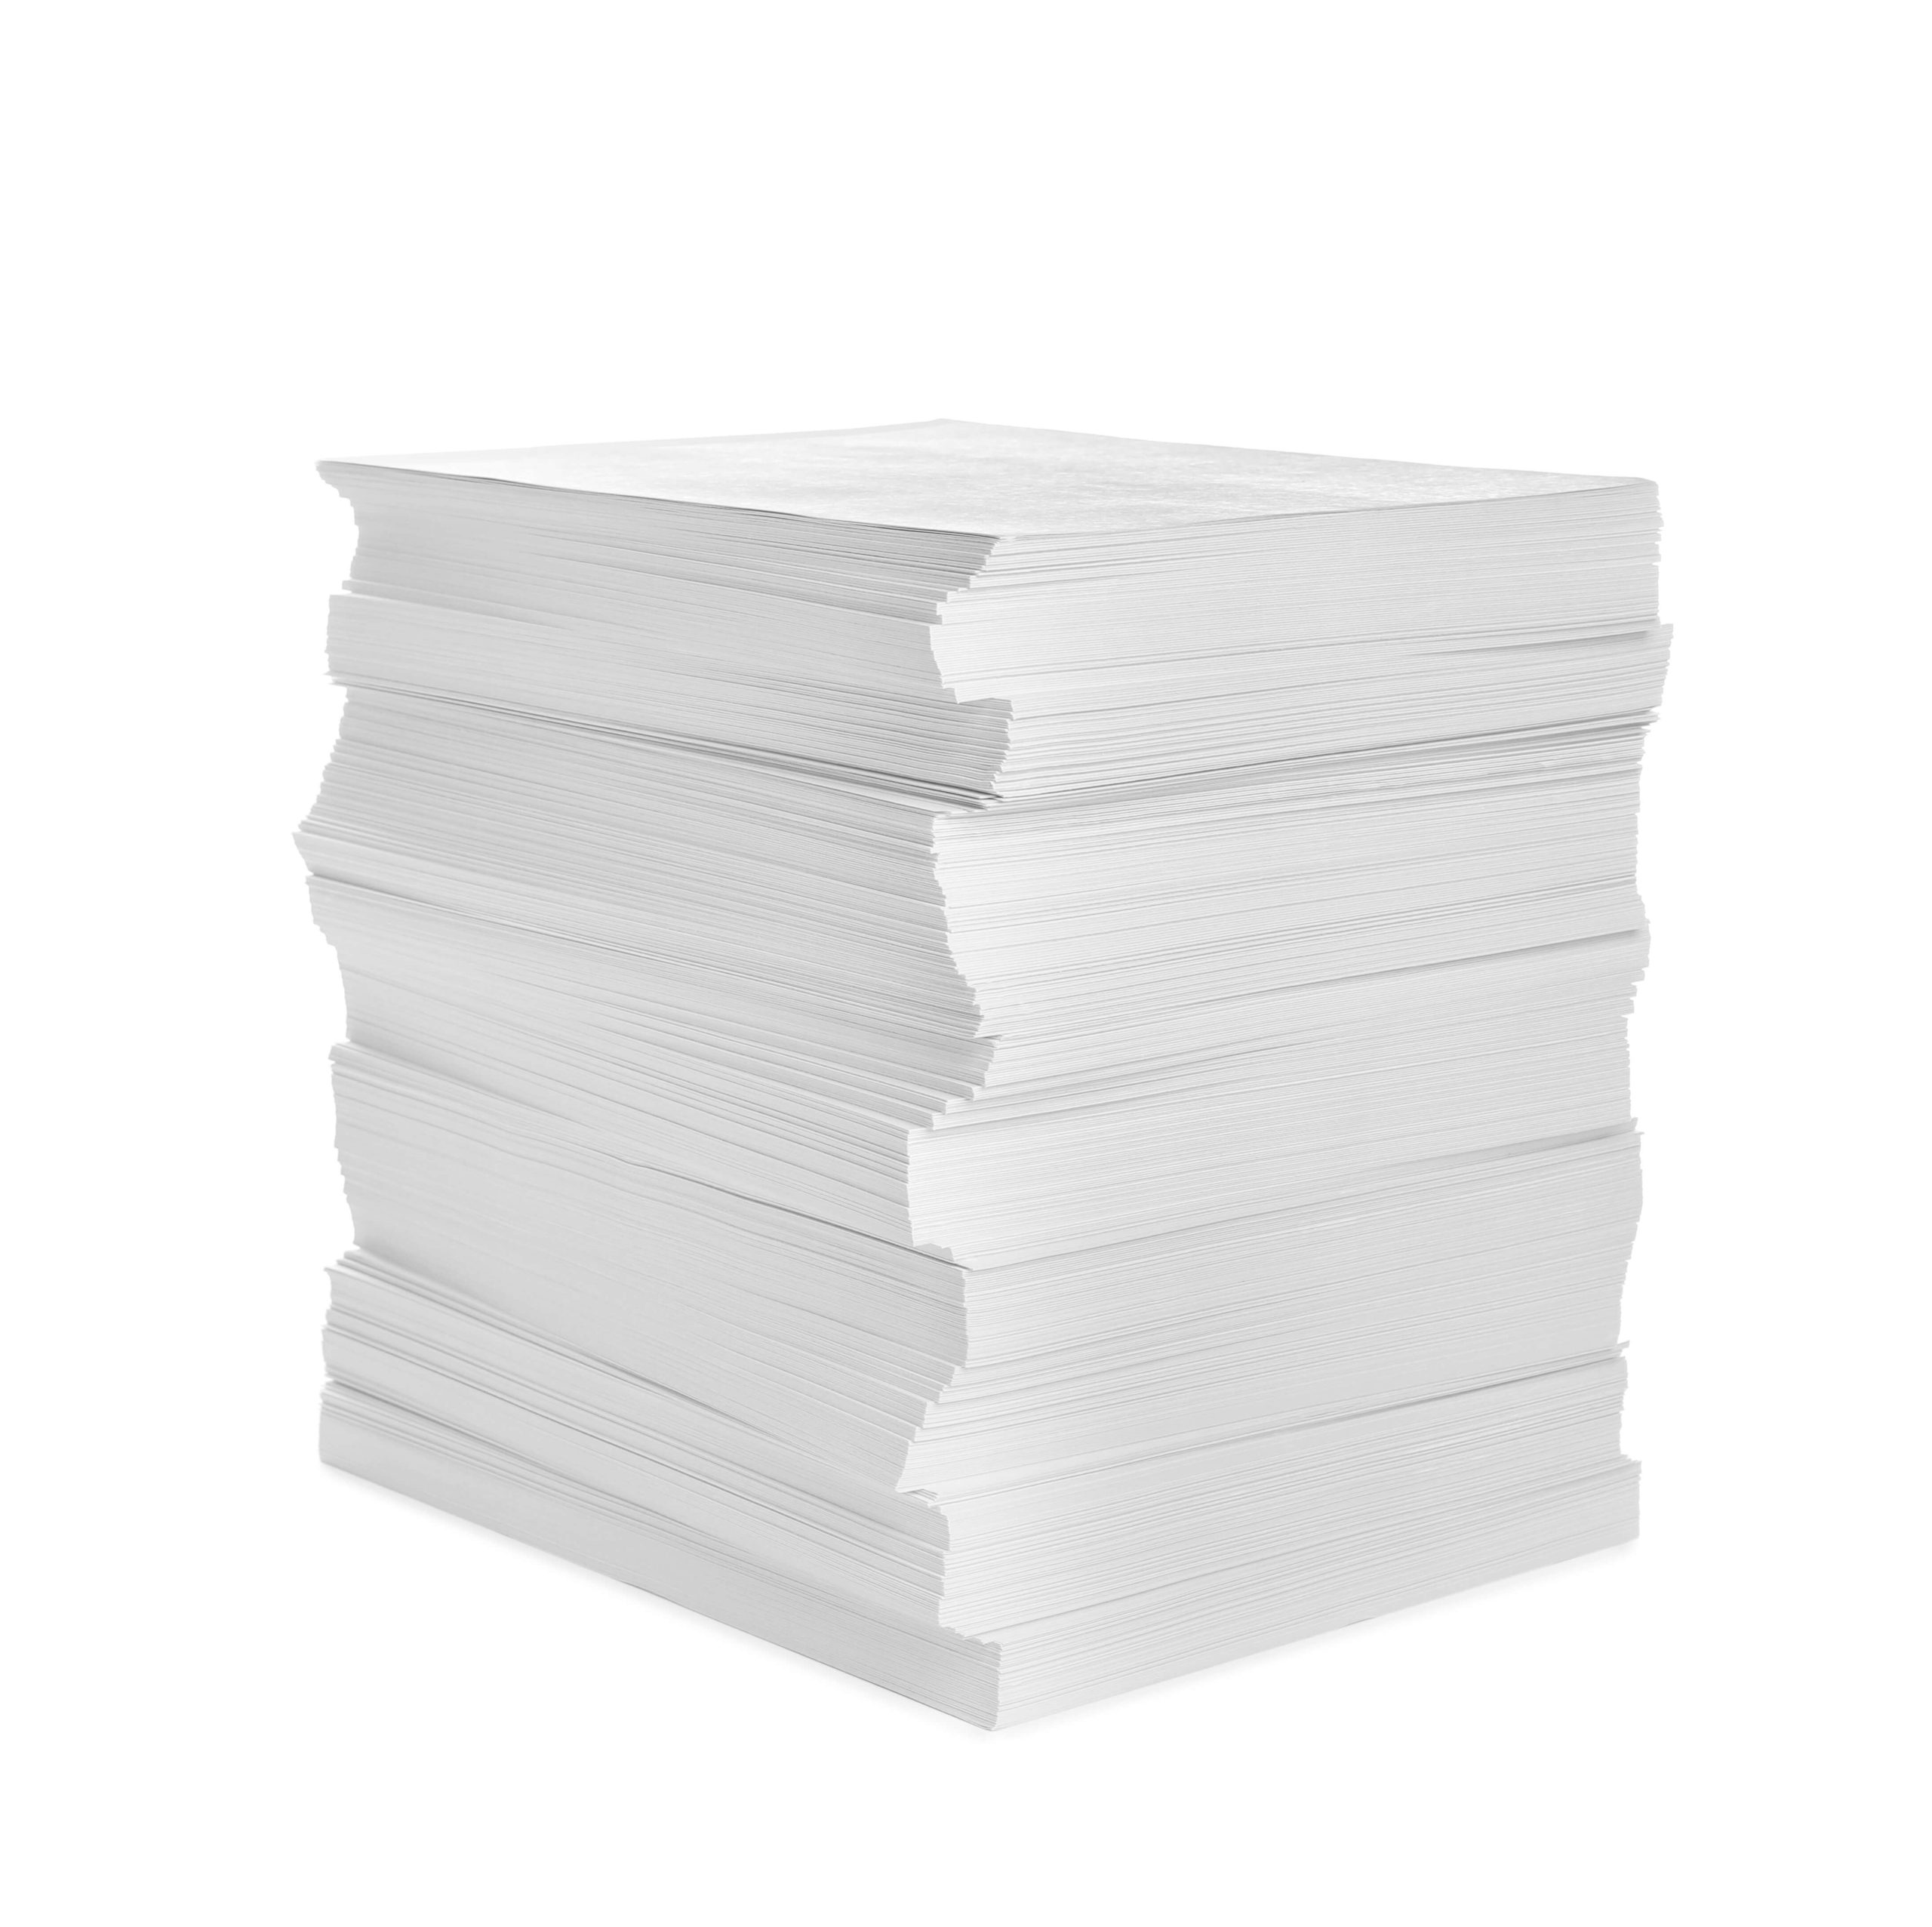 An image of Wholesale Copy Paper / Office Printer Paper.